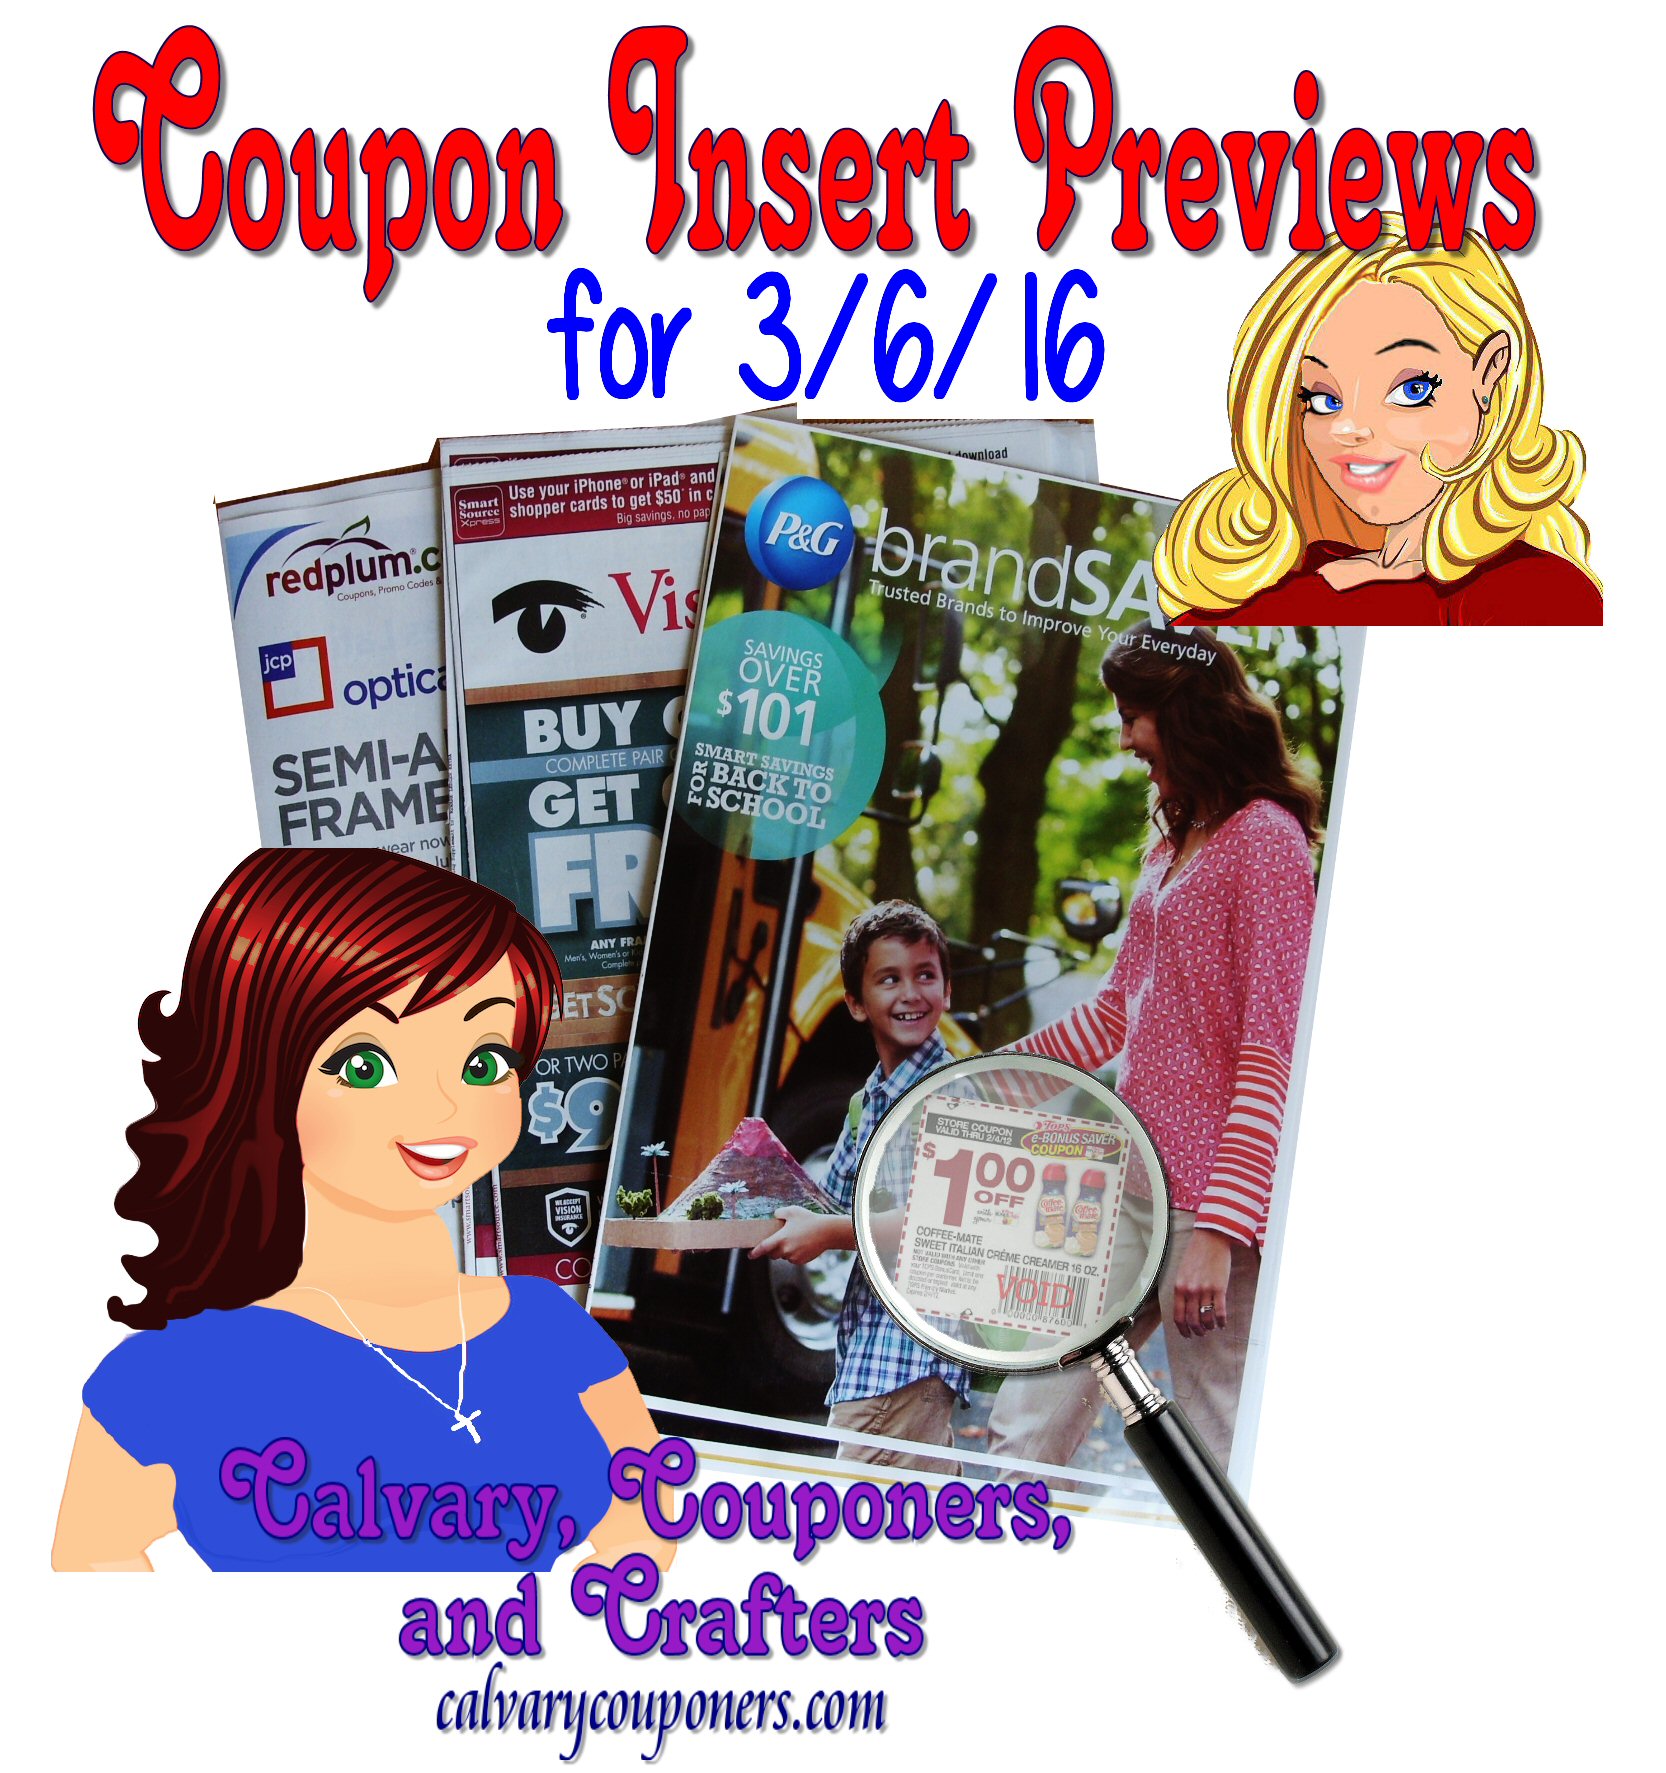 sunday coupon insert previews for march 6 2016 calvary couponers and crafters